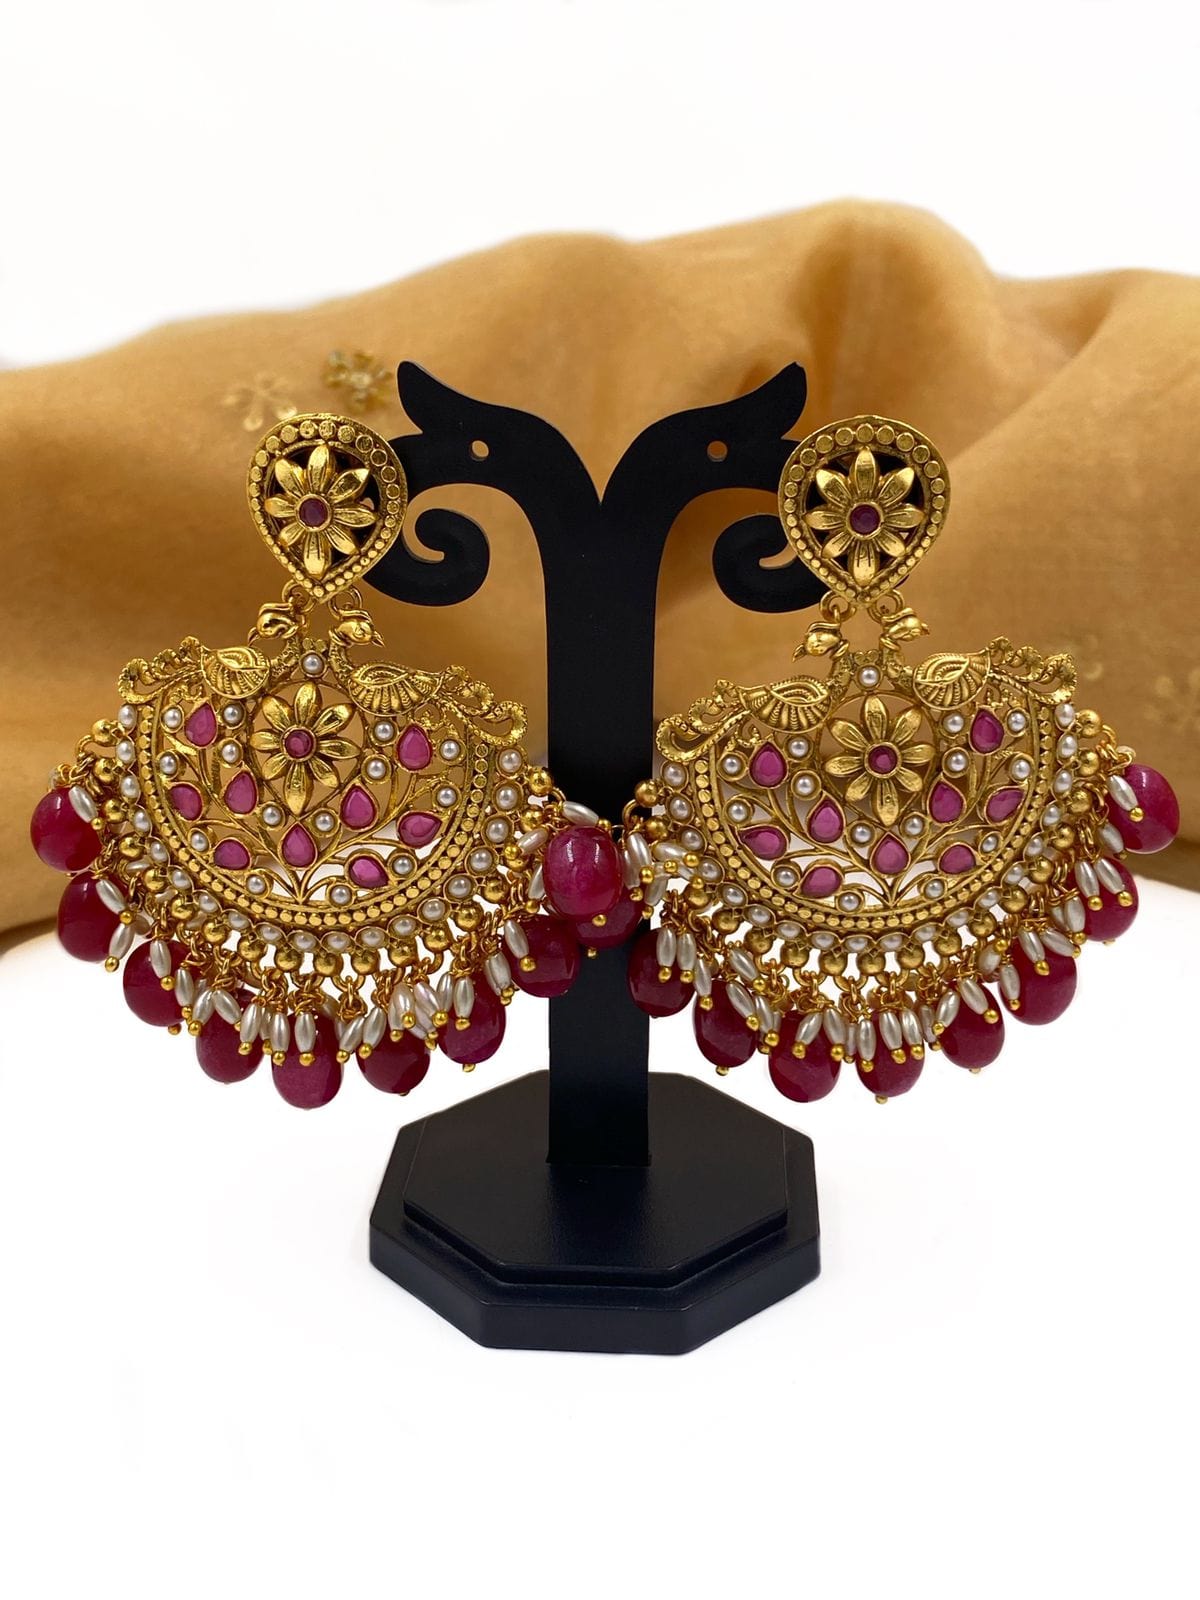 Exclusive Antique Gold Plated Golden Chandbali Earrings For Women By Gehna Shop Antique Earrings